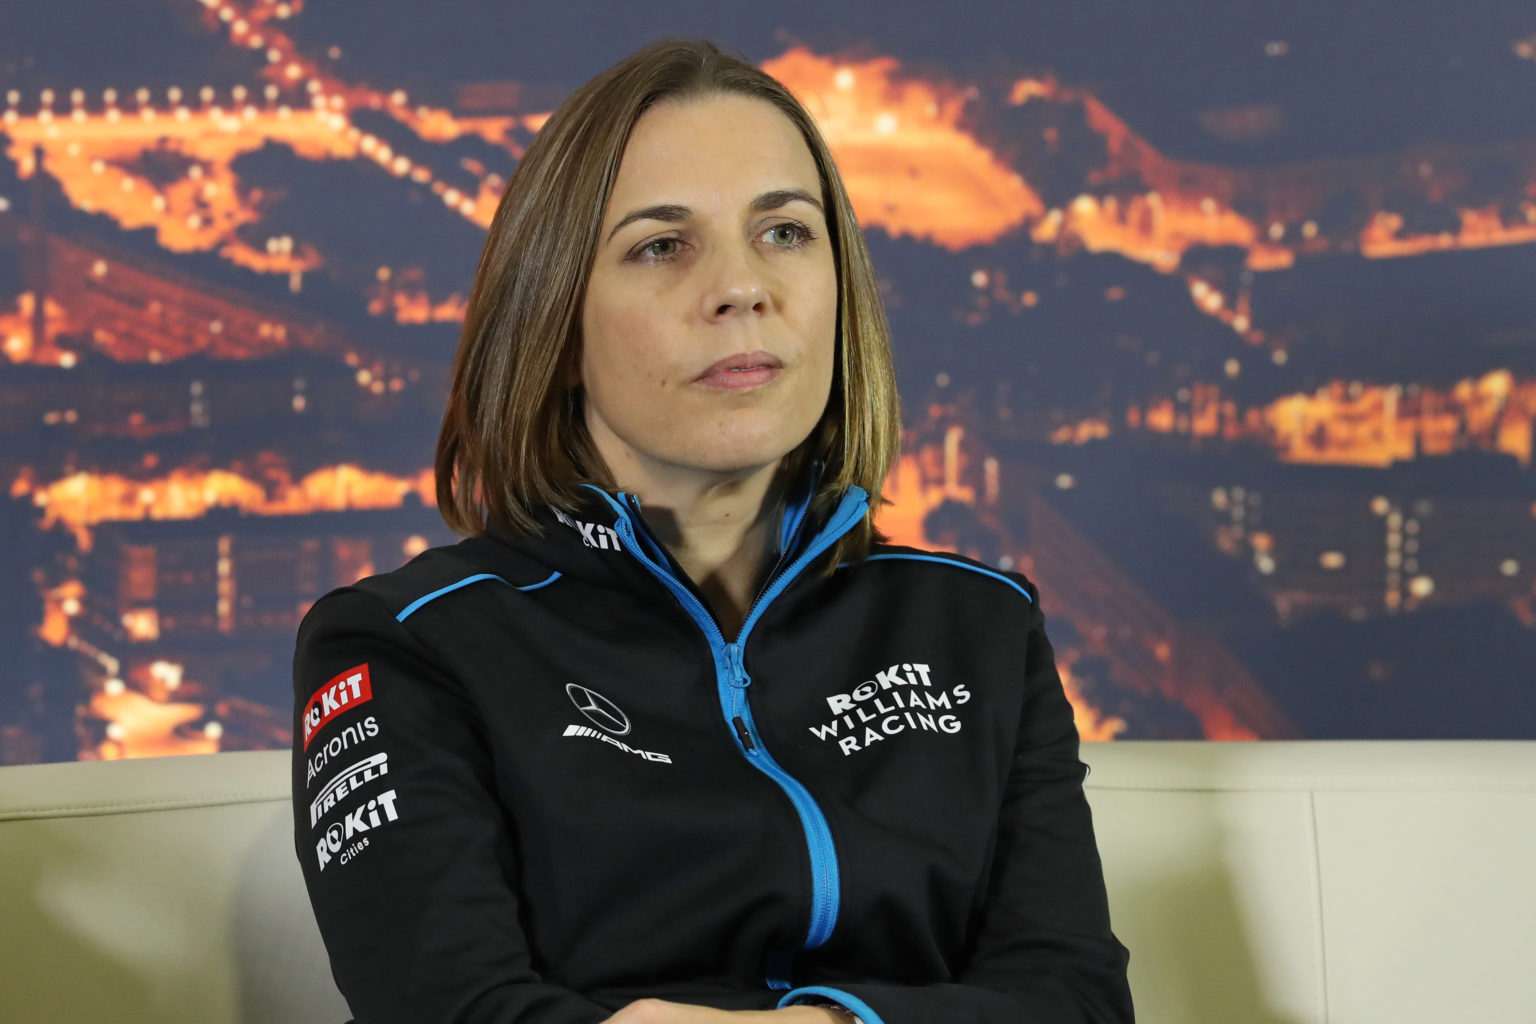 Claire Williams reveals she got a lot of abuse on social media over the decision to sell the team